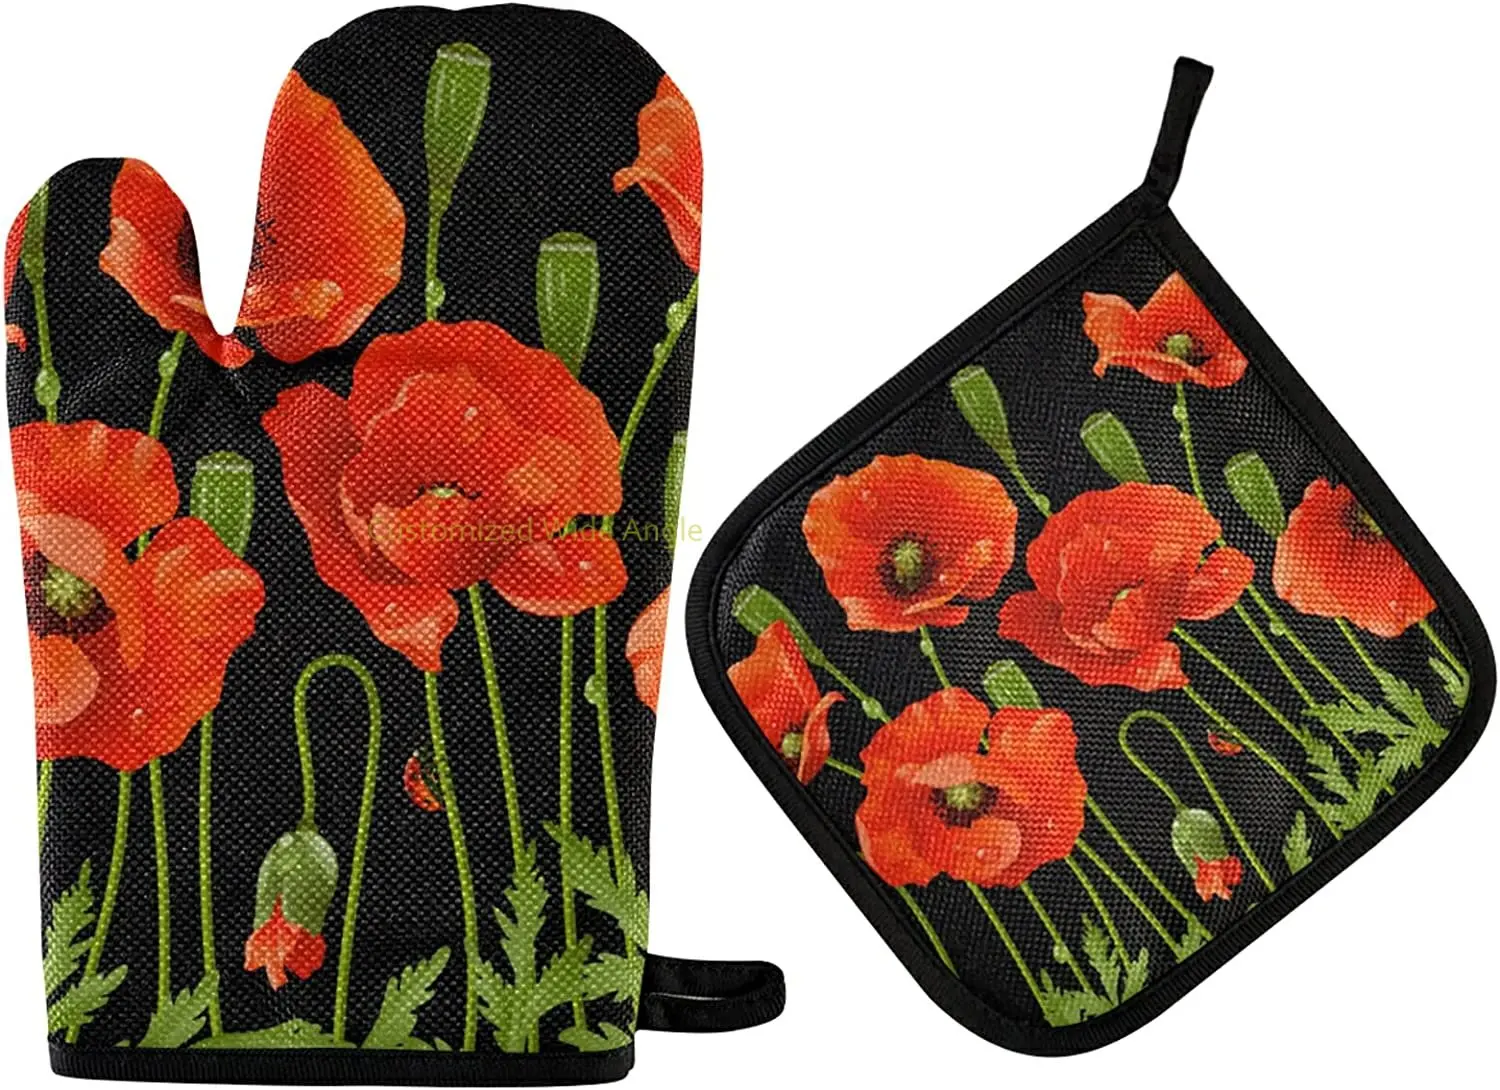 

Poppy Flower Oven Mitts and Pot Holders Insulated Gloves & Kitchen Counter Safe Mats for Cooking BBQ Baking Grilling